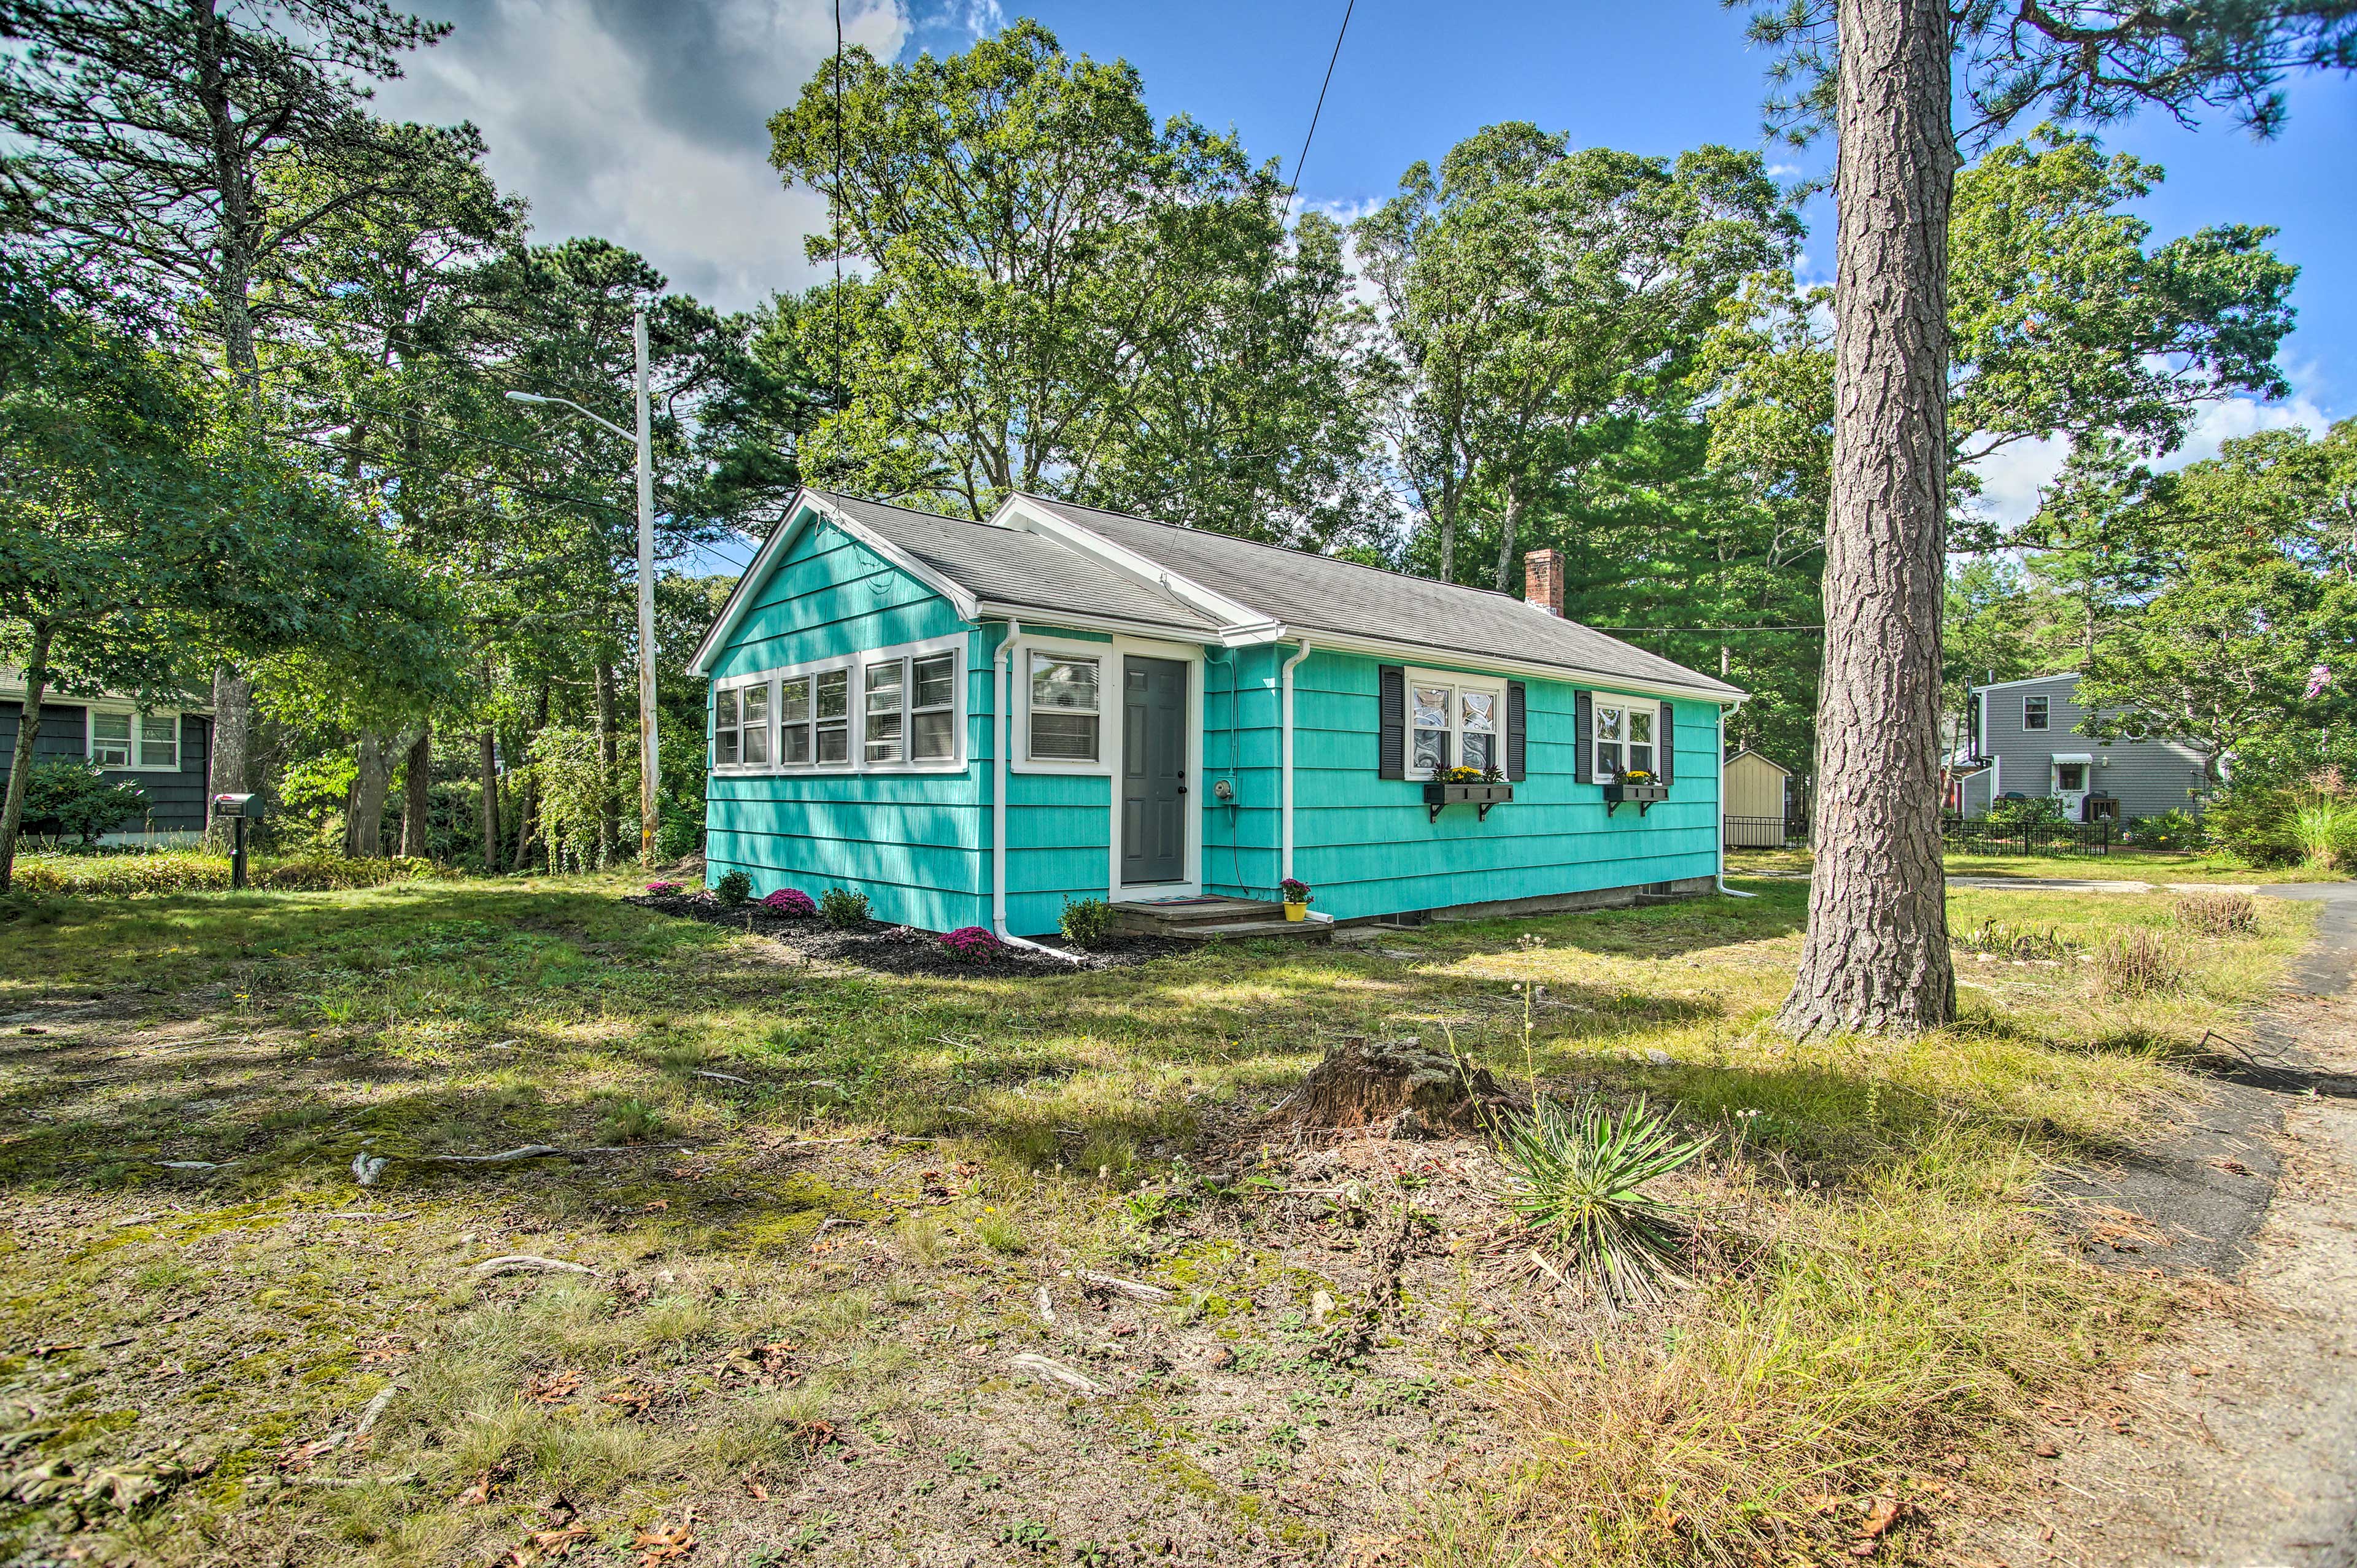 Wareham Vacation Rental | 3BR | 1BA | 872 Sq Ft | 2 Steps Required for Access